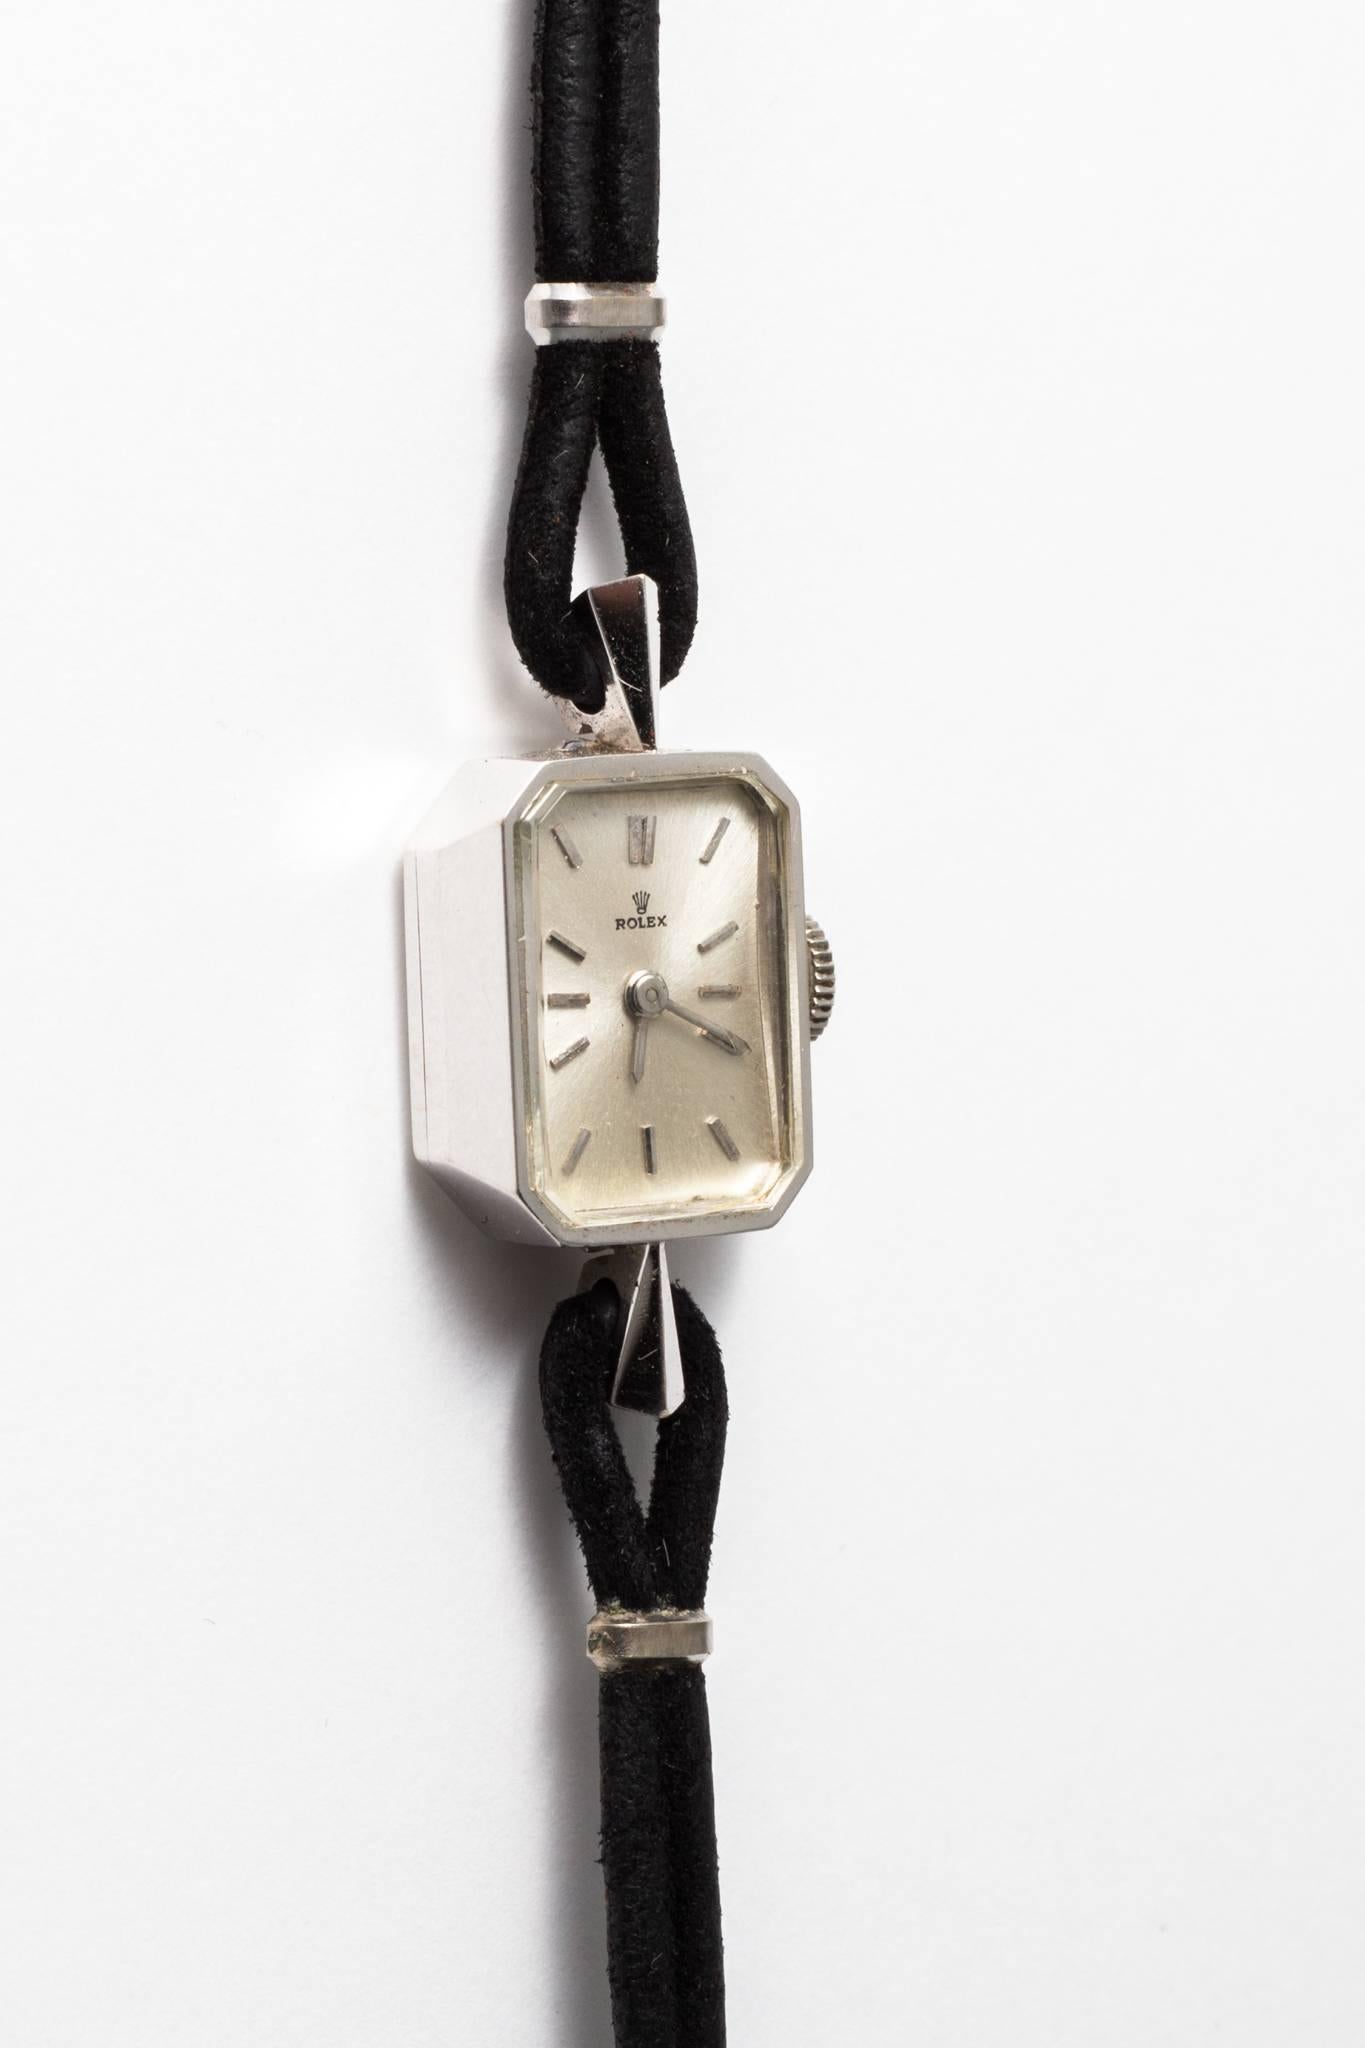 Beacon Hill Jewelers Presents:

A vintage, 1960's ladies Rolex wrist watch in 14 karat white gold.  In like new condition, this watch comes complete with it's rare original box.  

Featuring a silver dial and white gold case, this chic vintage rolex